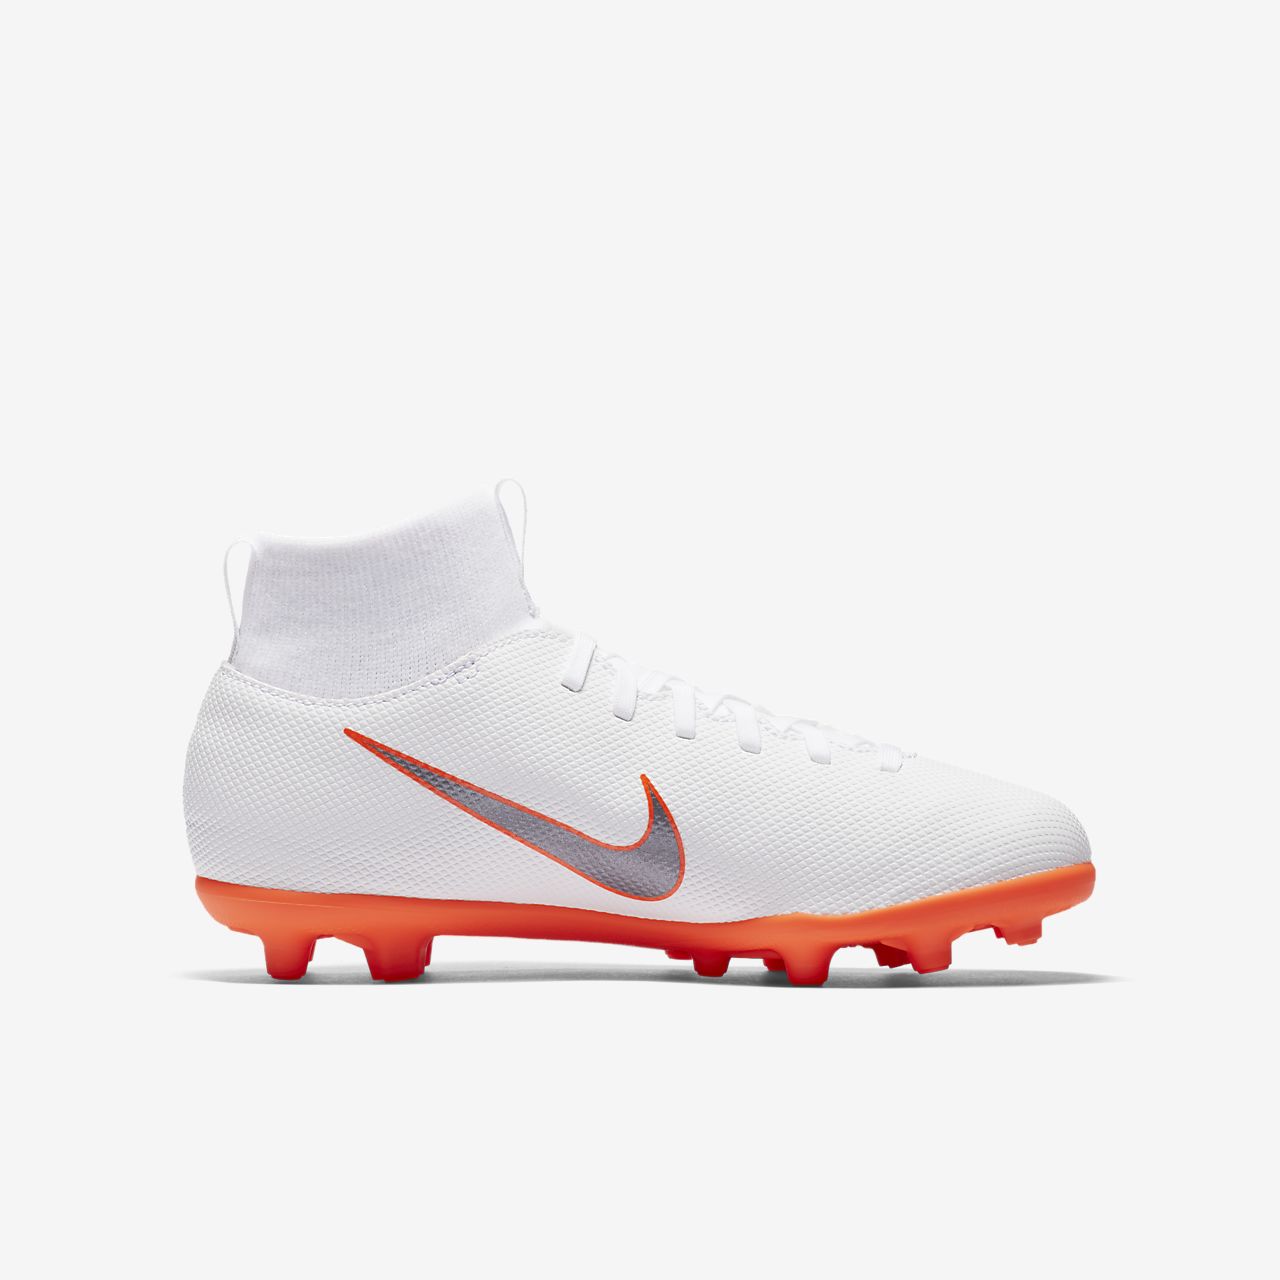 Nike jr. Superfly VI Club MG from 37.52 Compare prices.